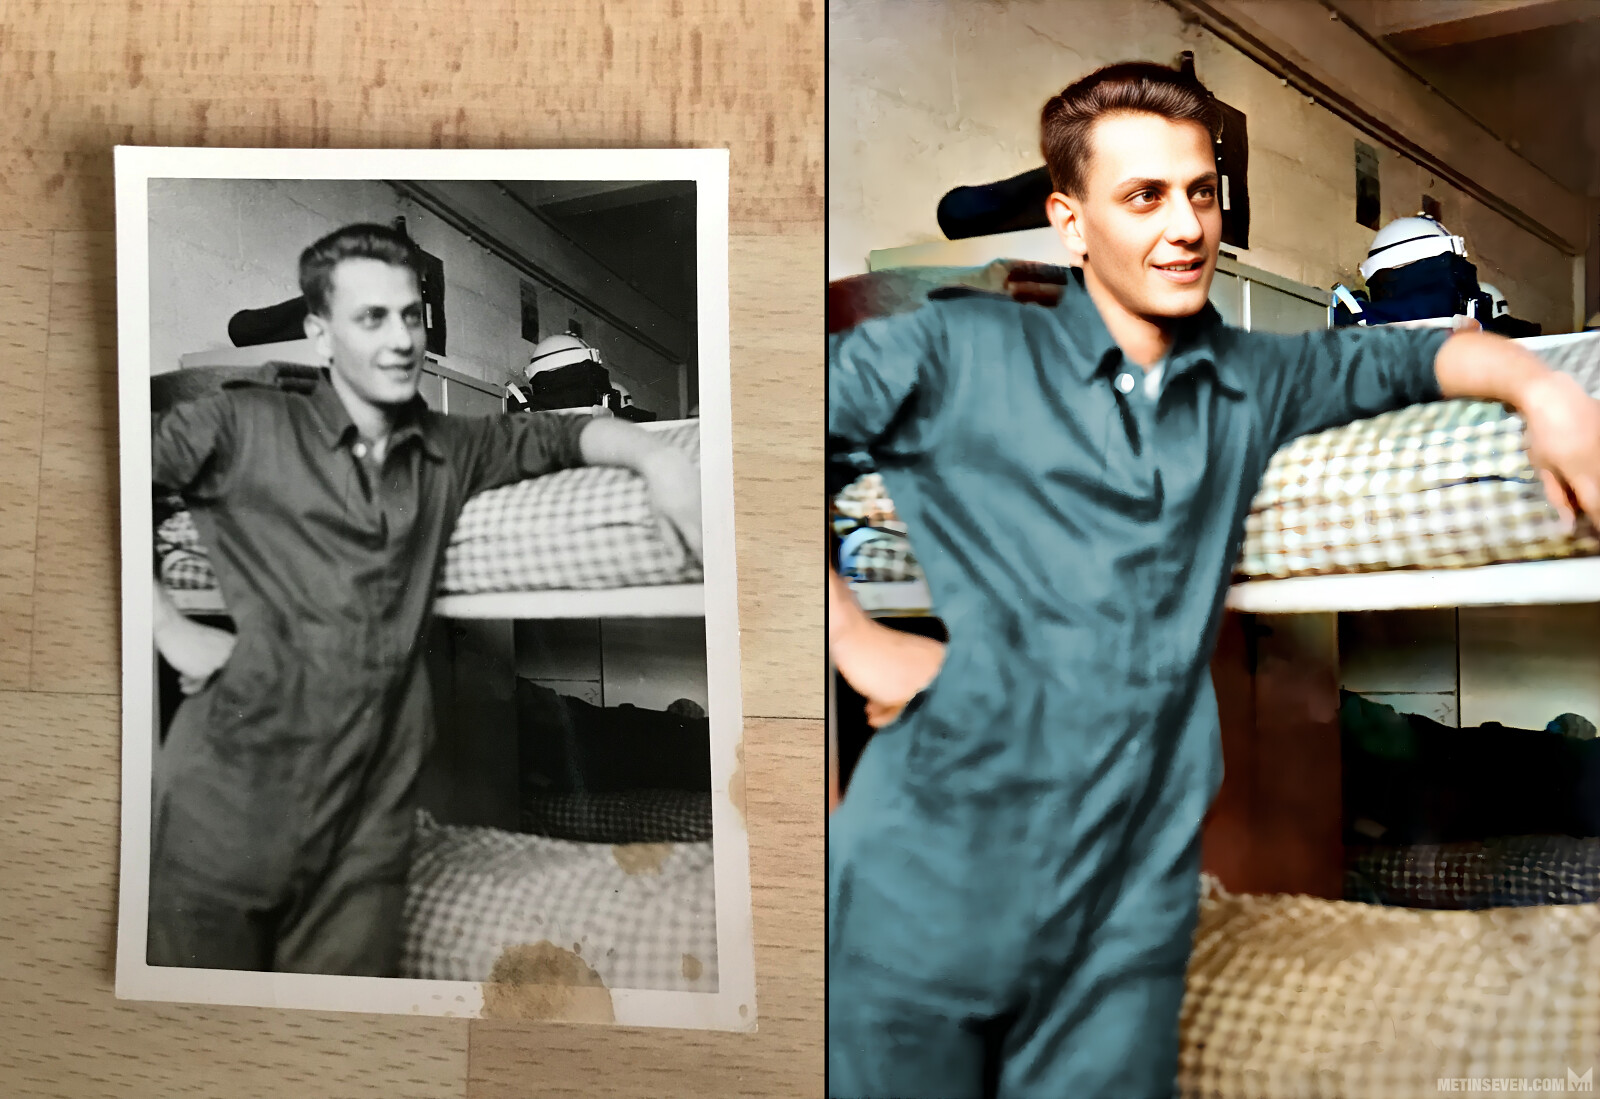 Restoration and colorization of an old photo that was supplied as the distorted left-side mobile snapshot of the printed photo. Note that the subject's face is out of focus in the original photograph.